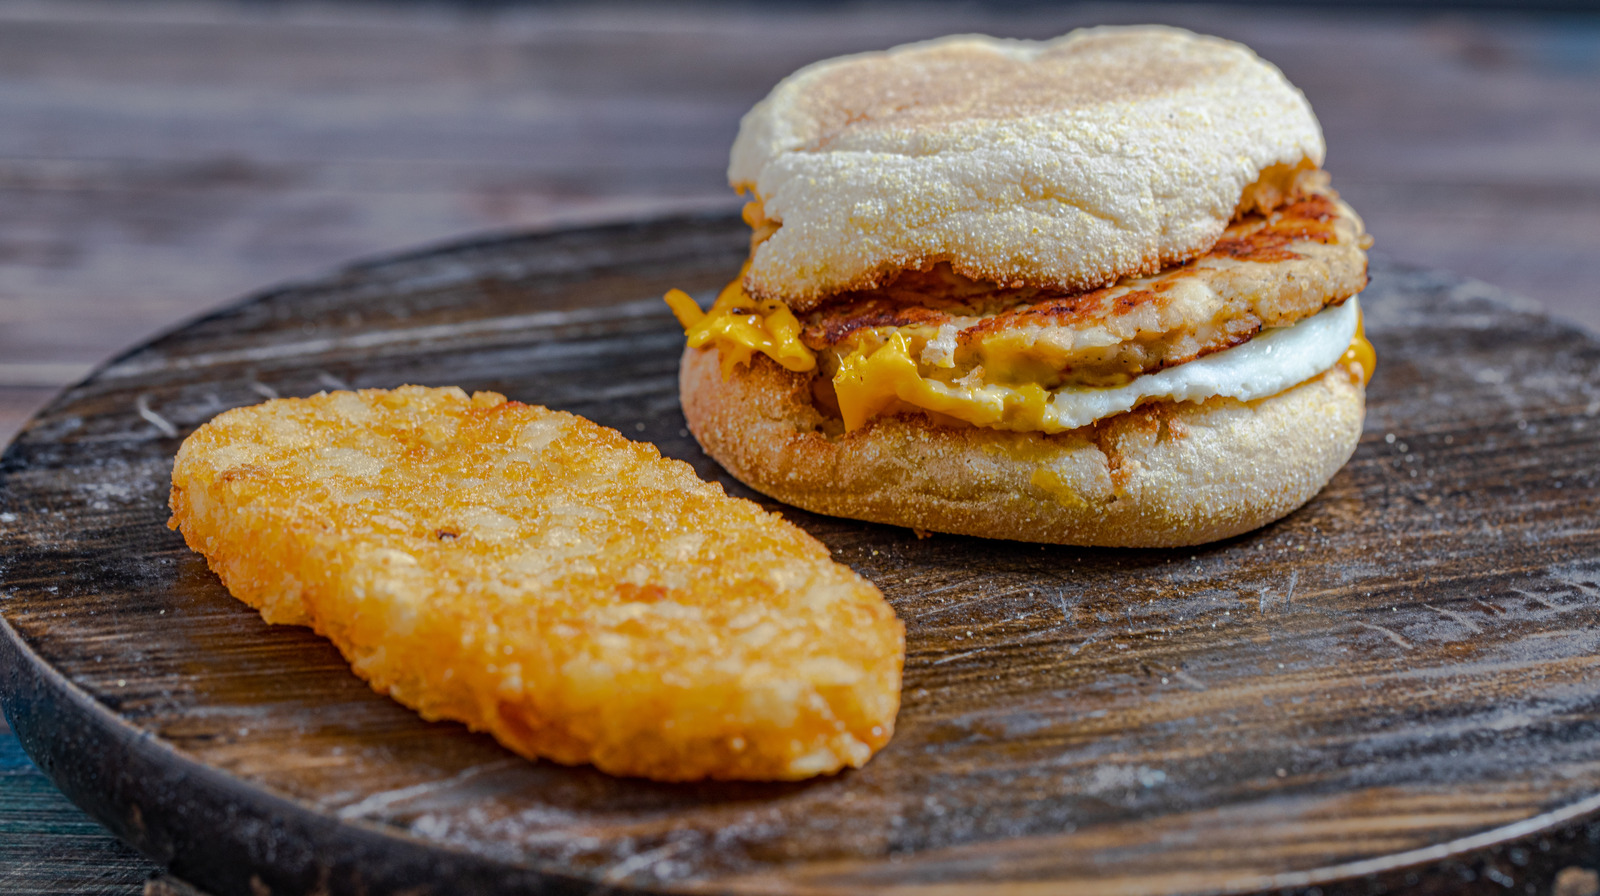 https://www.thedailymeal.com/img/gallery/the-potato-variety-mcdonalds-uses-for-hash-browns/l-intro-1675097086.jpg